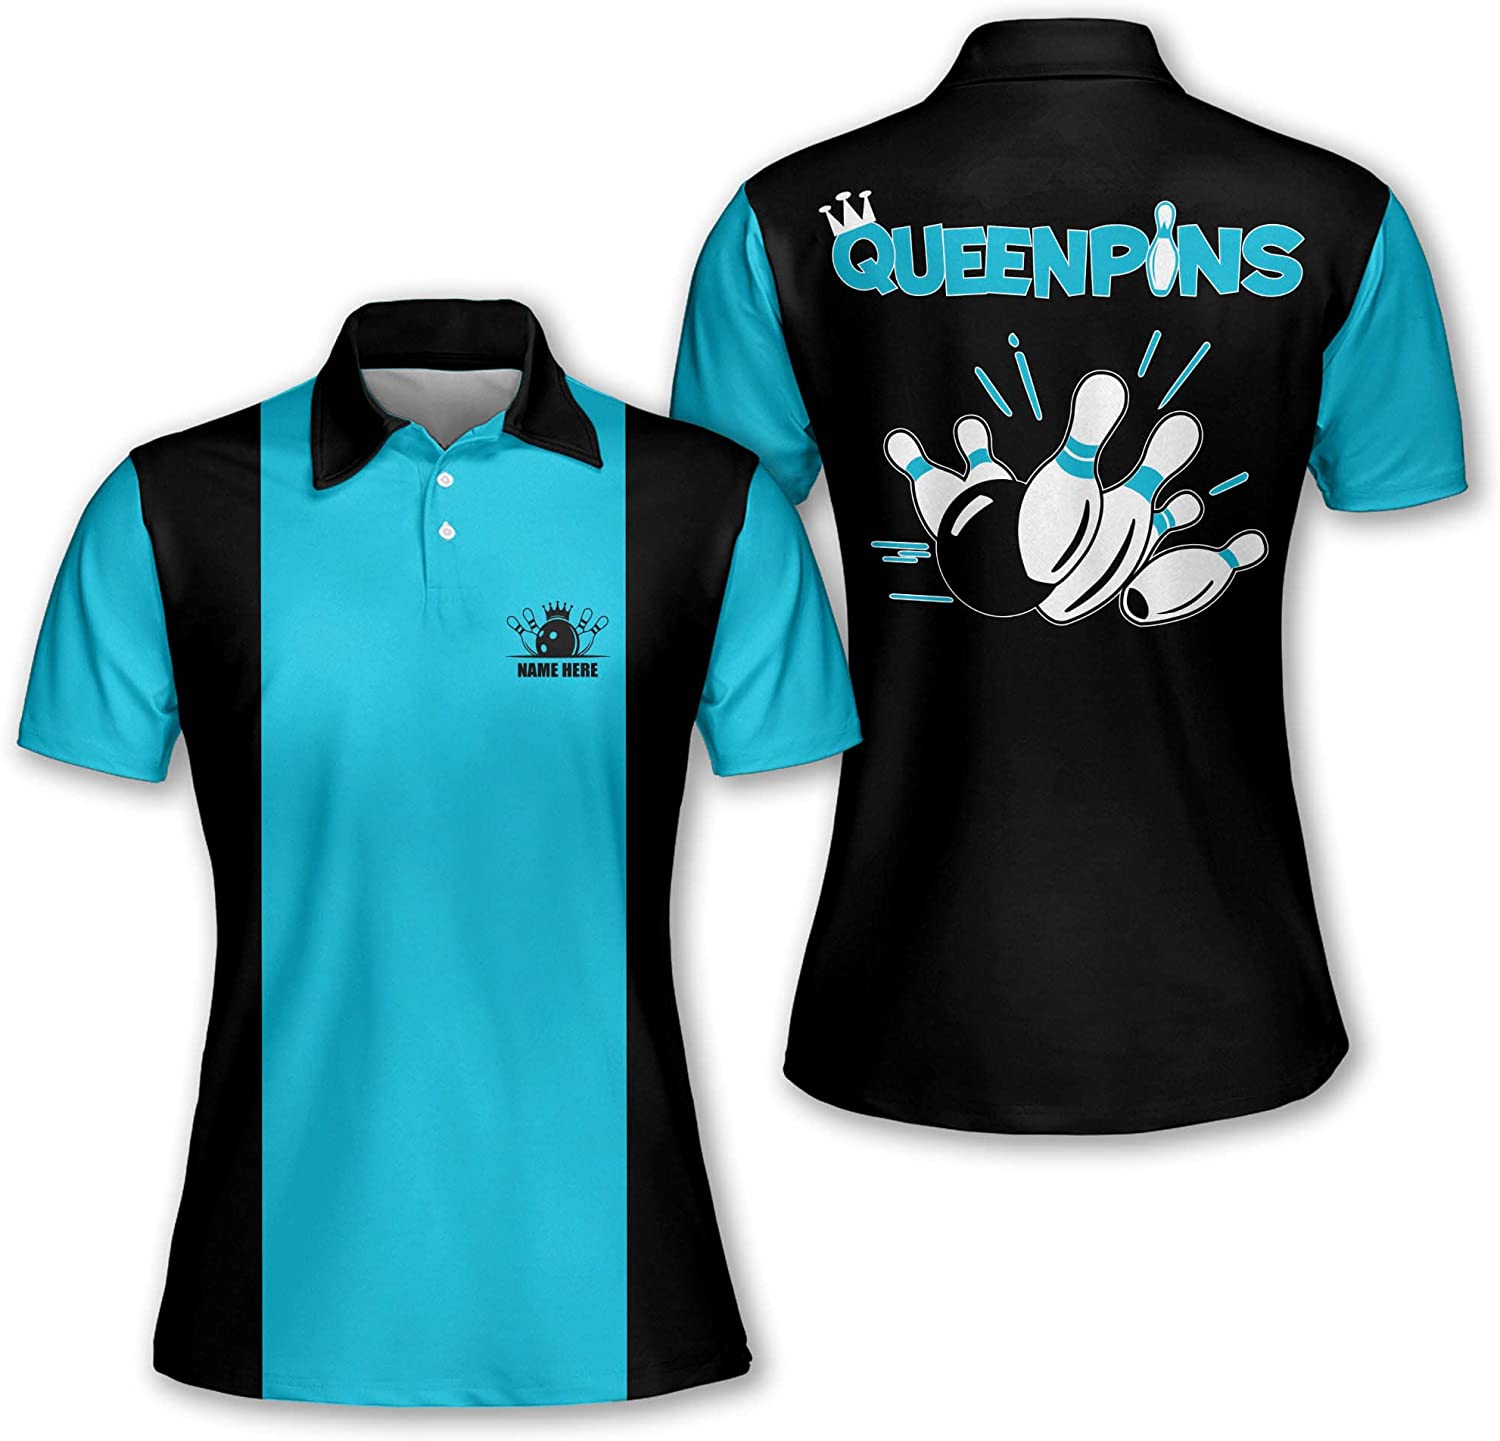 Customized Women’s Bowling Shirts with Queen Pins – PW-013